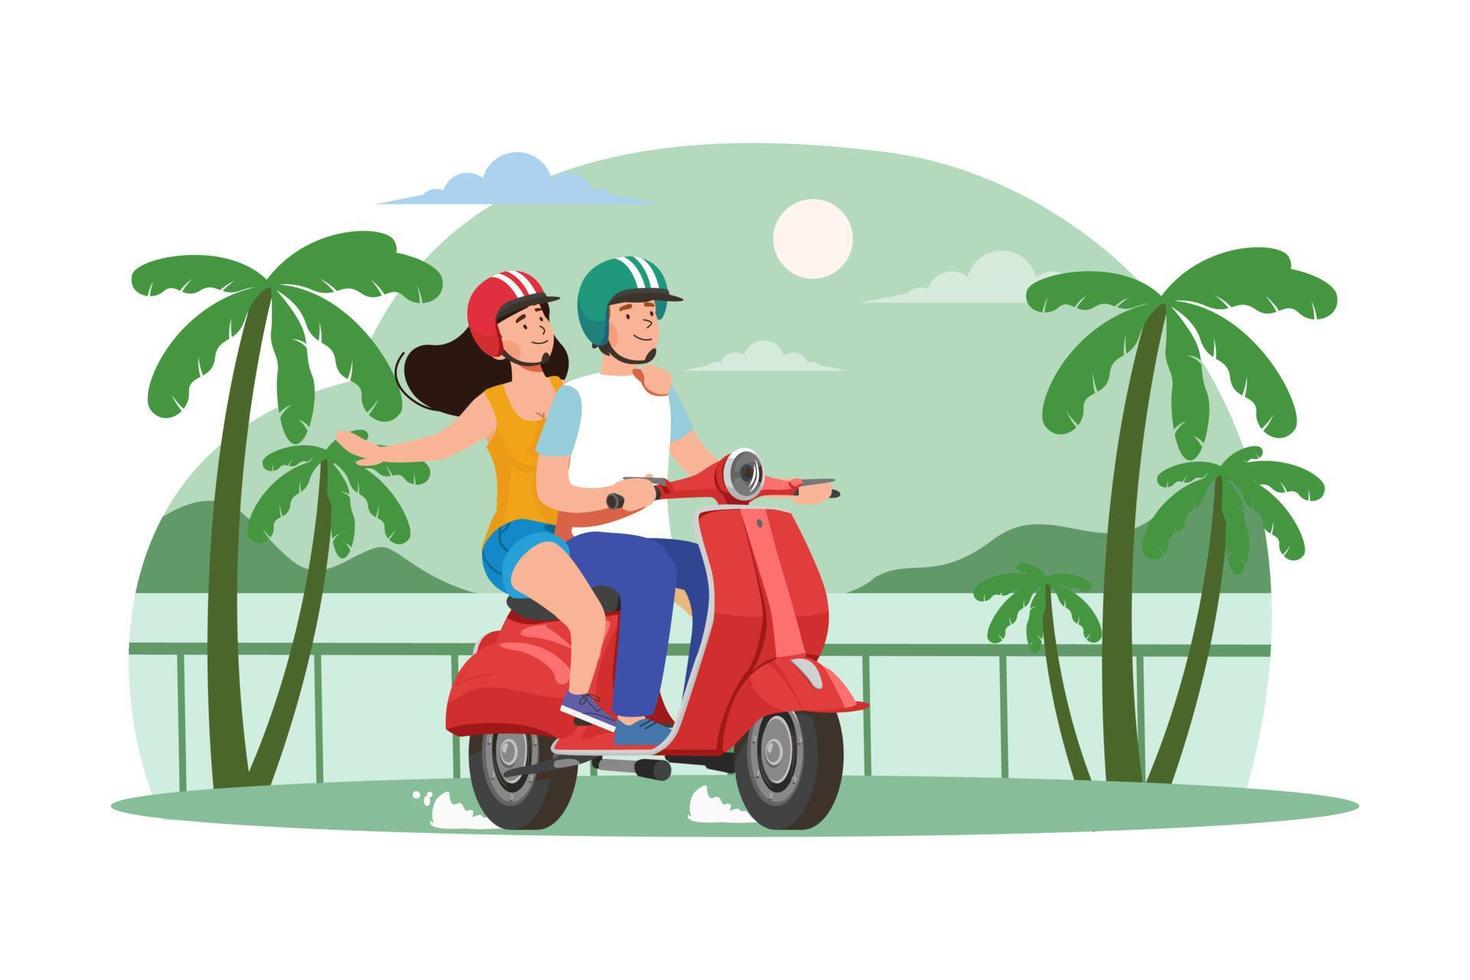 Couple riding the scooter vector